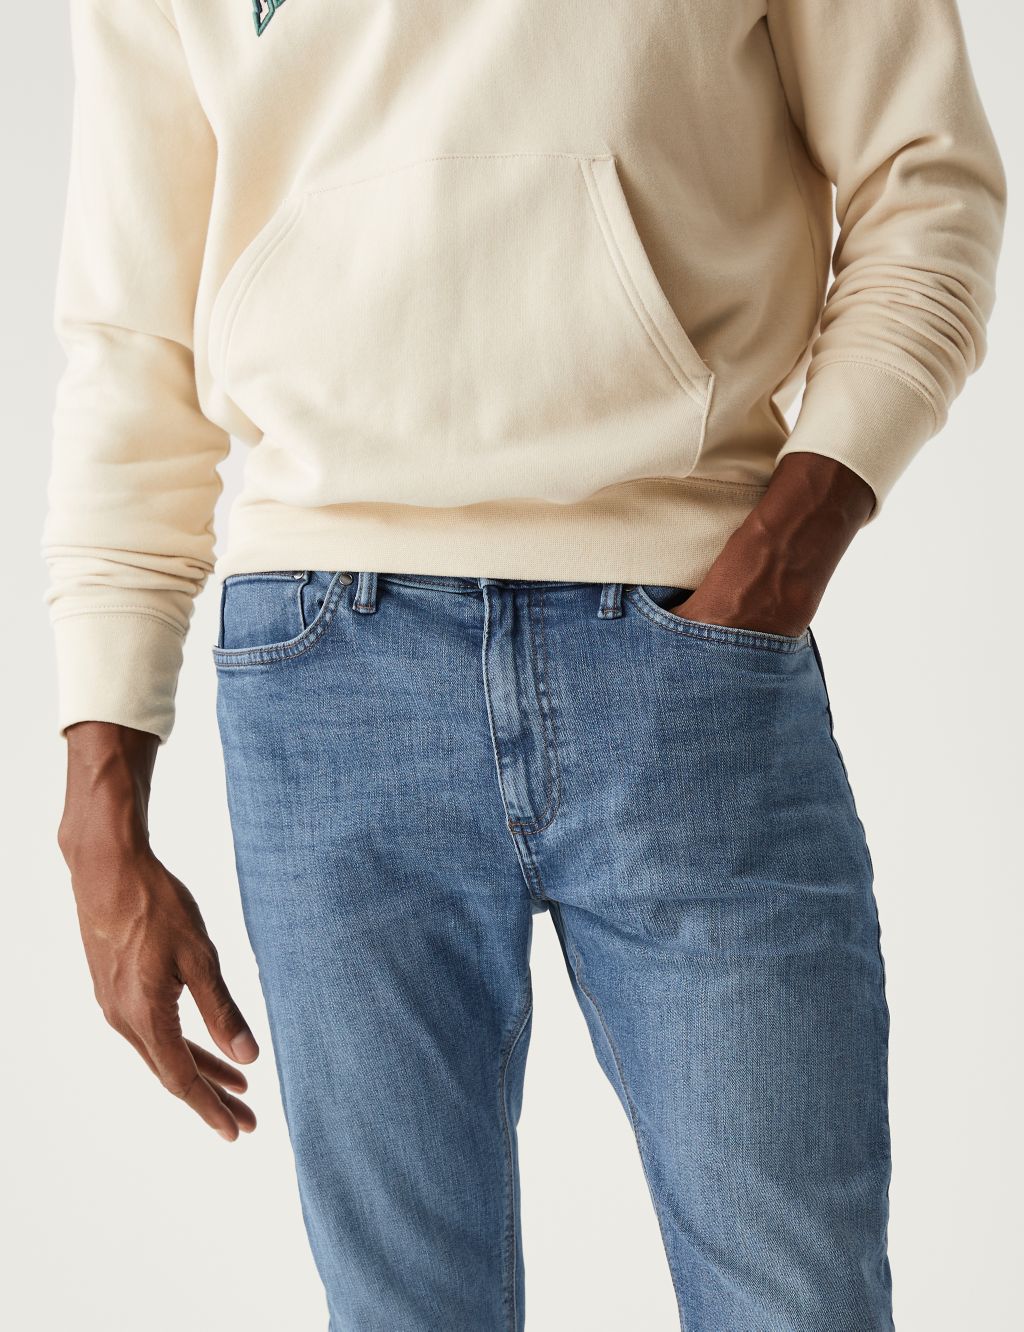 Skinny Fit Stretch Jeans image 3